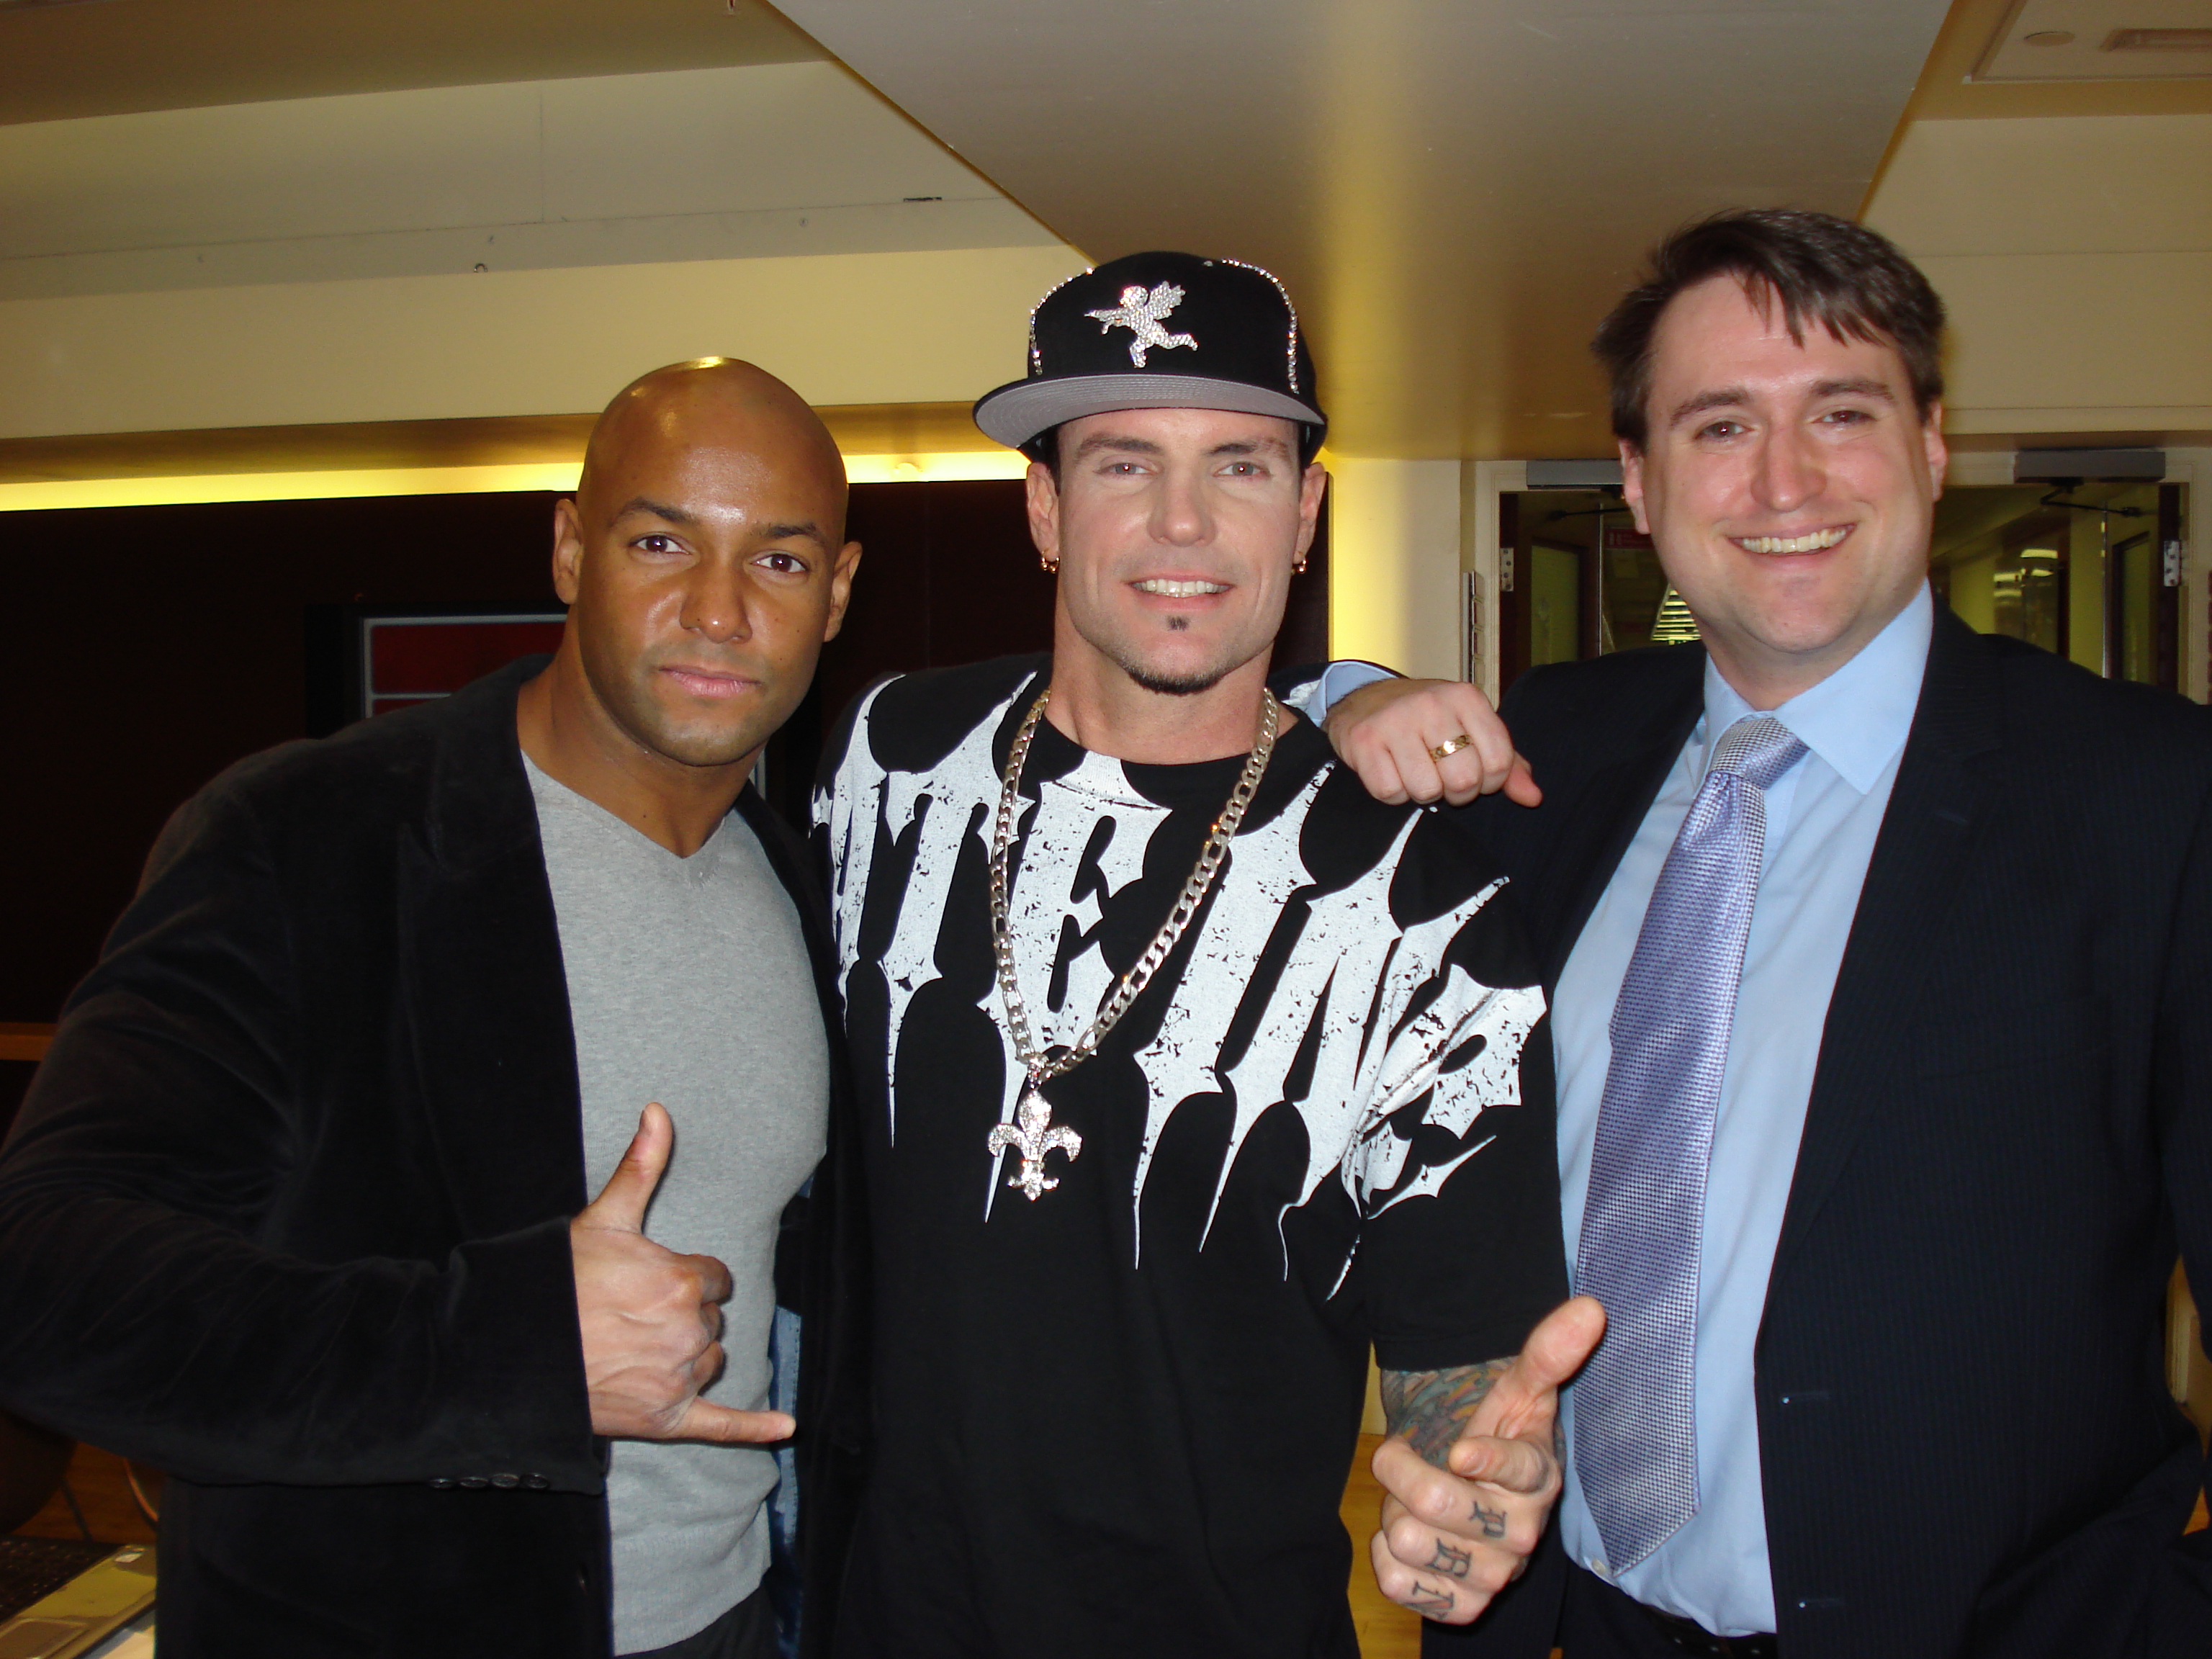 Life Outside Pre Casting meeting with Producer Martin J. Thomas, Actor/Rapper Vanilla Ice and Casting Director/Co-Producer Andrew Slade at ITV Studios, London.